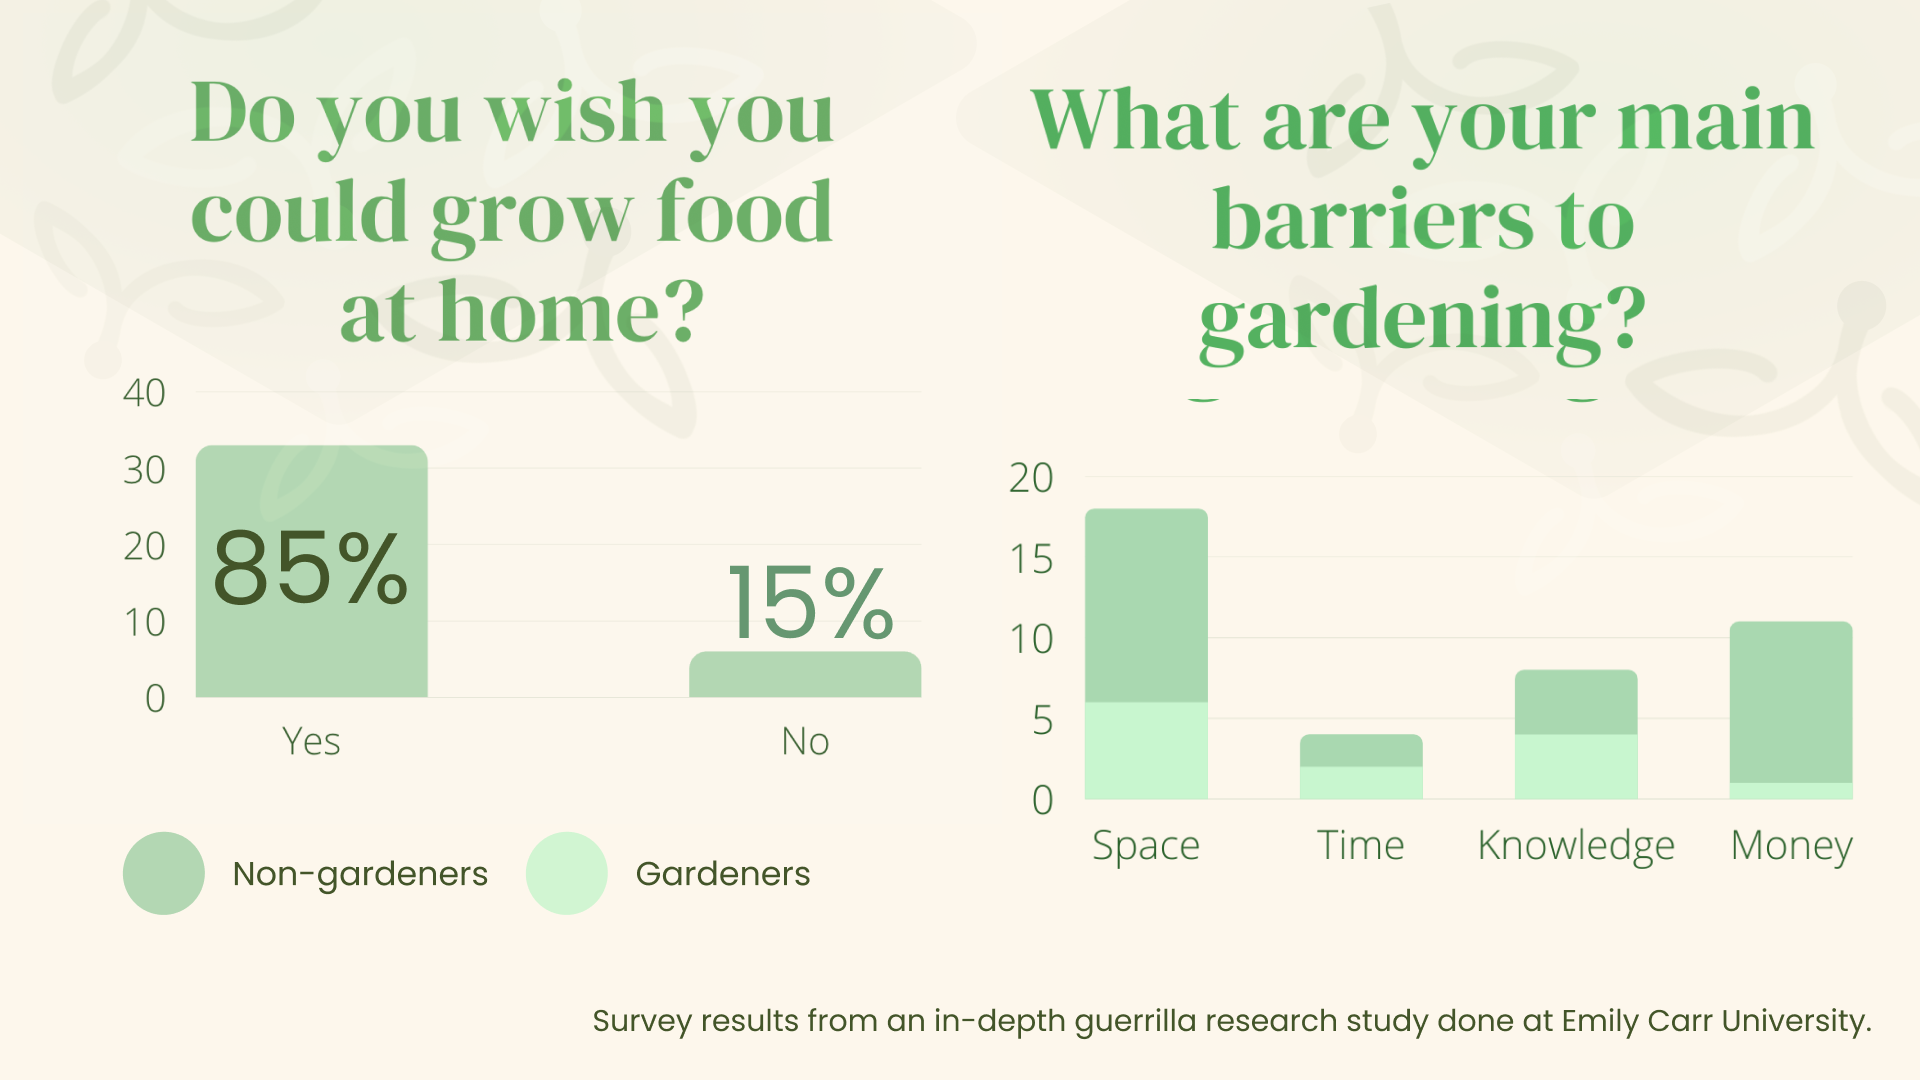 According to a study conducted by Ember Johnstone at Emily Carr University in 2022, 85% of students wished they could grow food at home. The main barriers they listed were space, money, knowledge, and time constraints. 